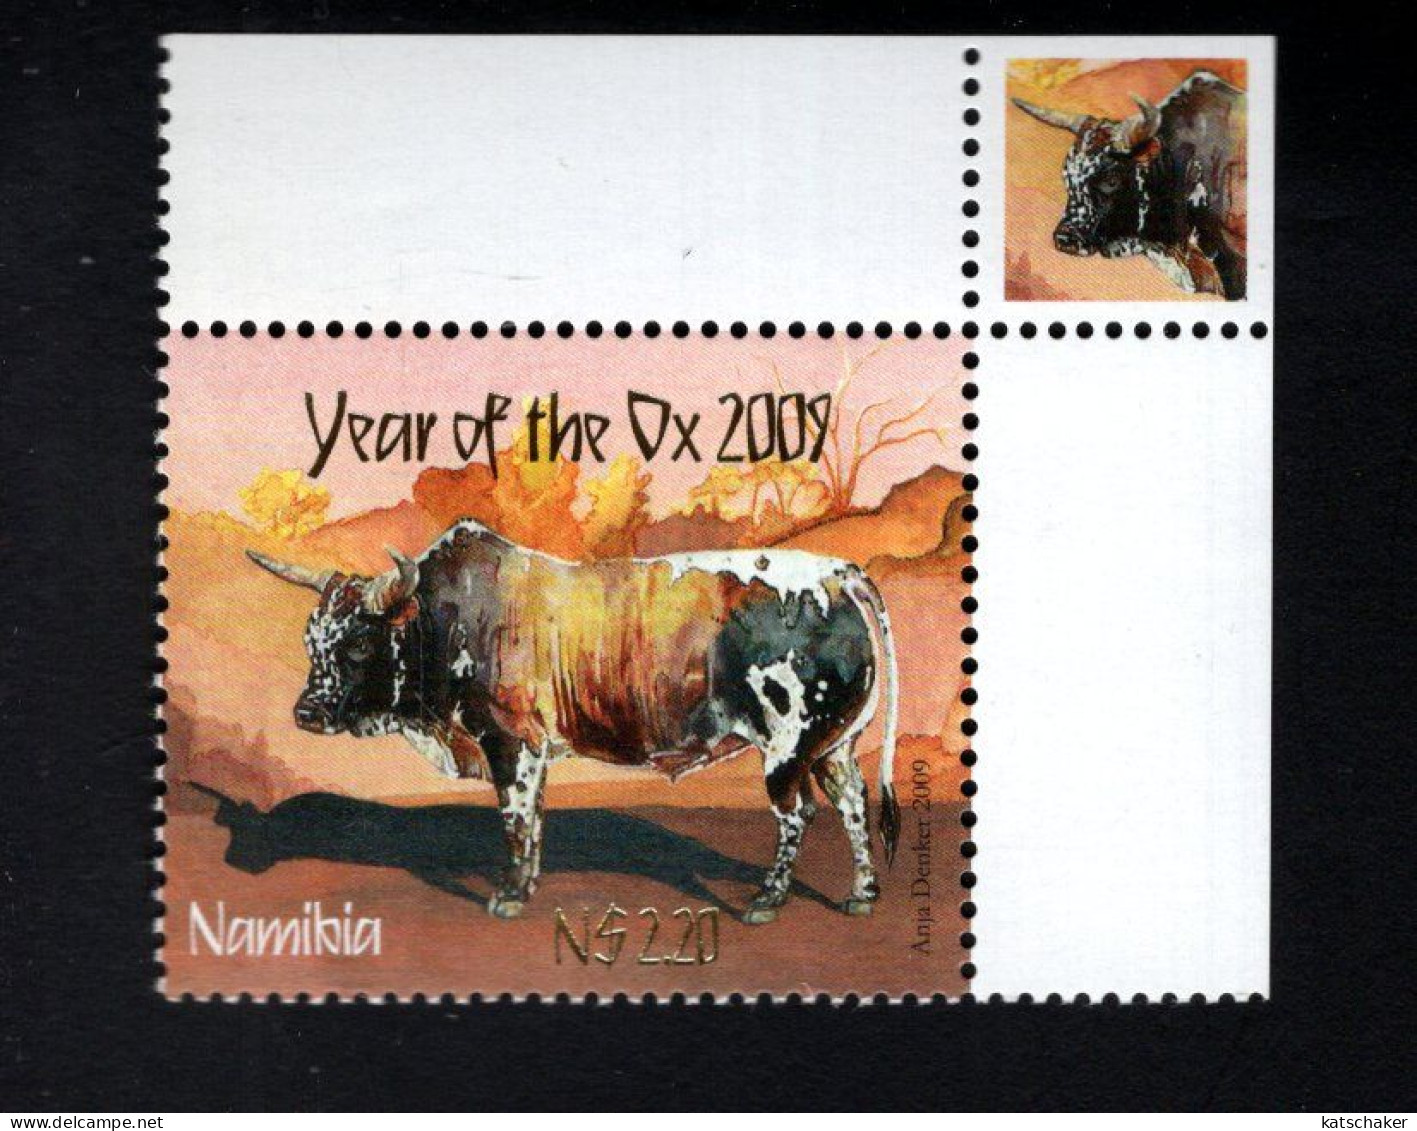 2031348716 2009 SCOTT 1173 (XX) POSTFRIS MINT NEVER HINGED -  YEAR OF THE OX - NEW YEAR 2009 - Namibie (1990- ...)